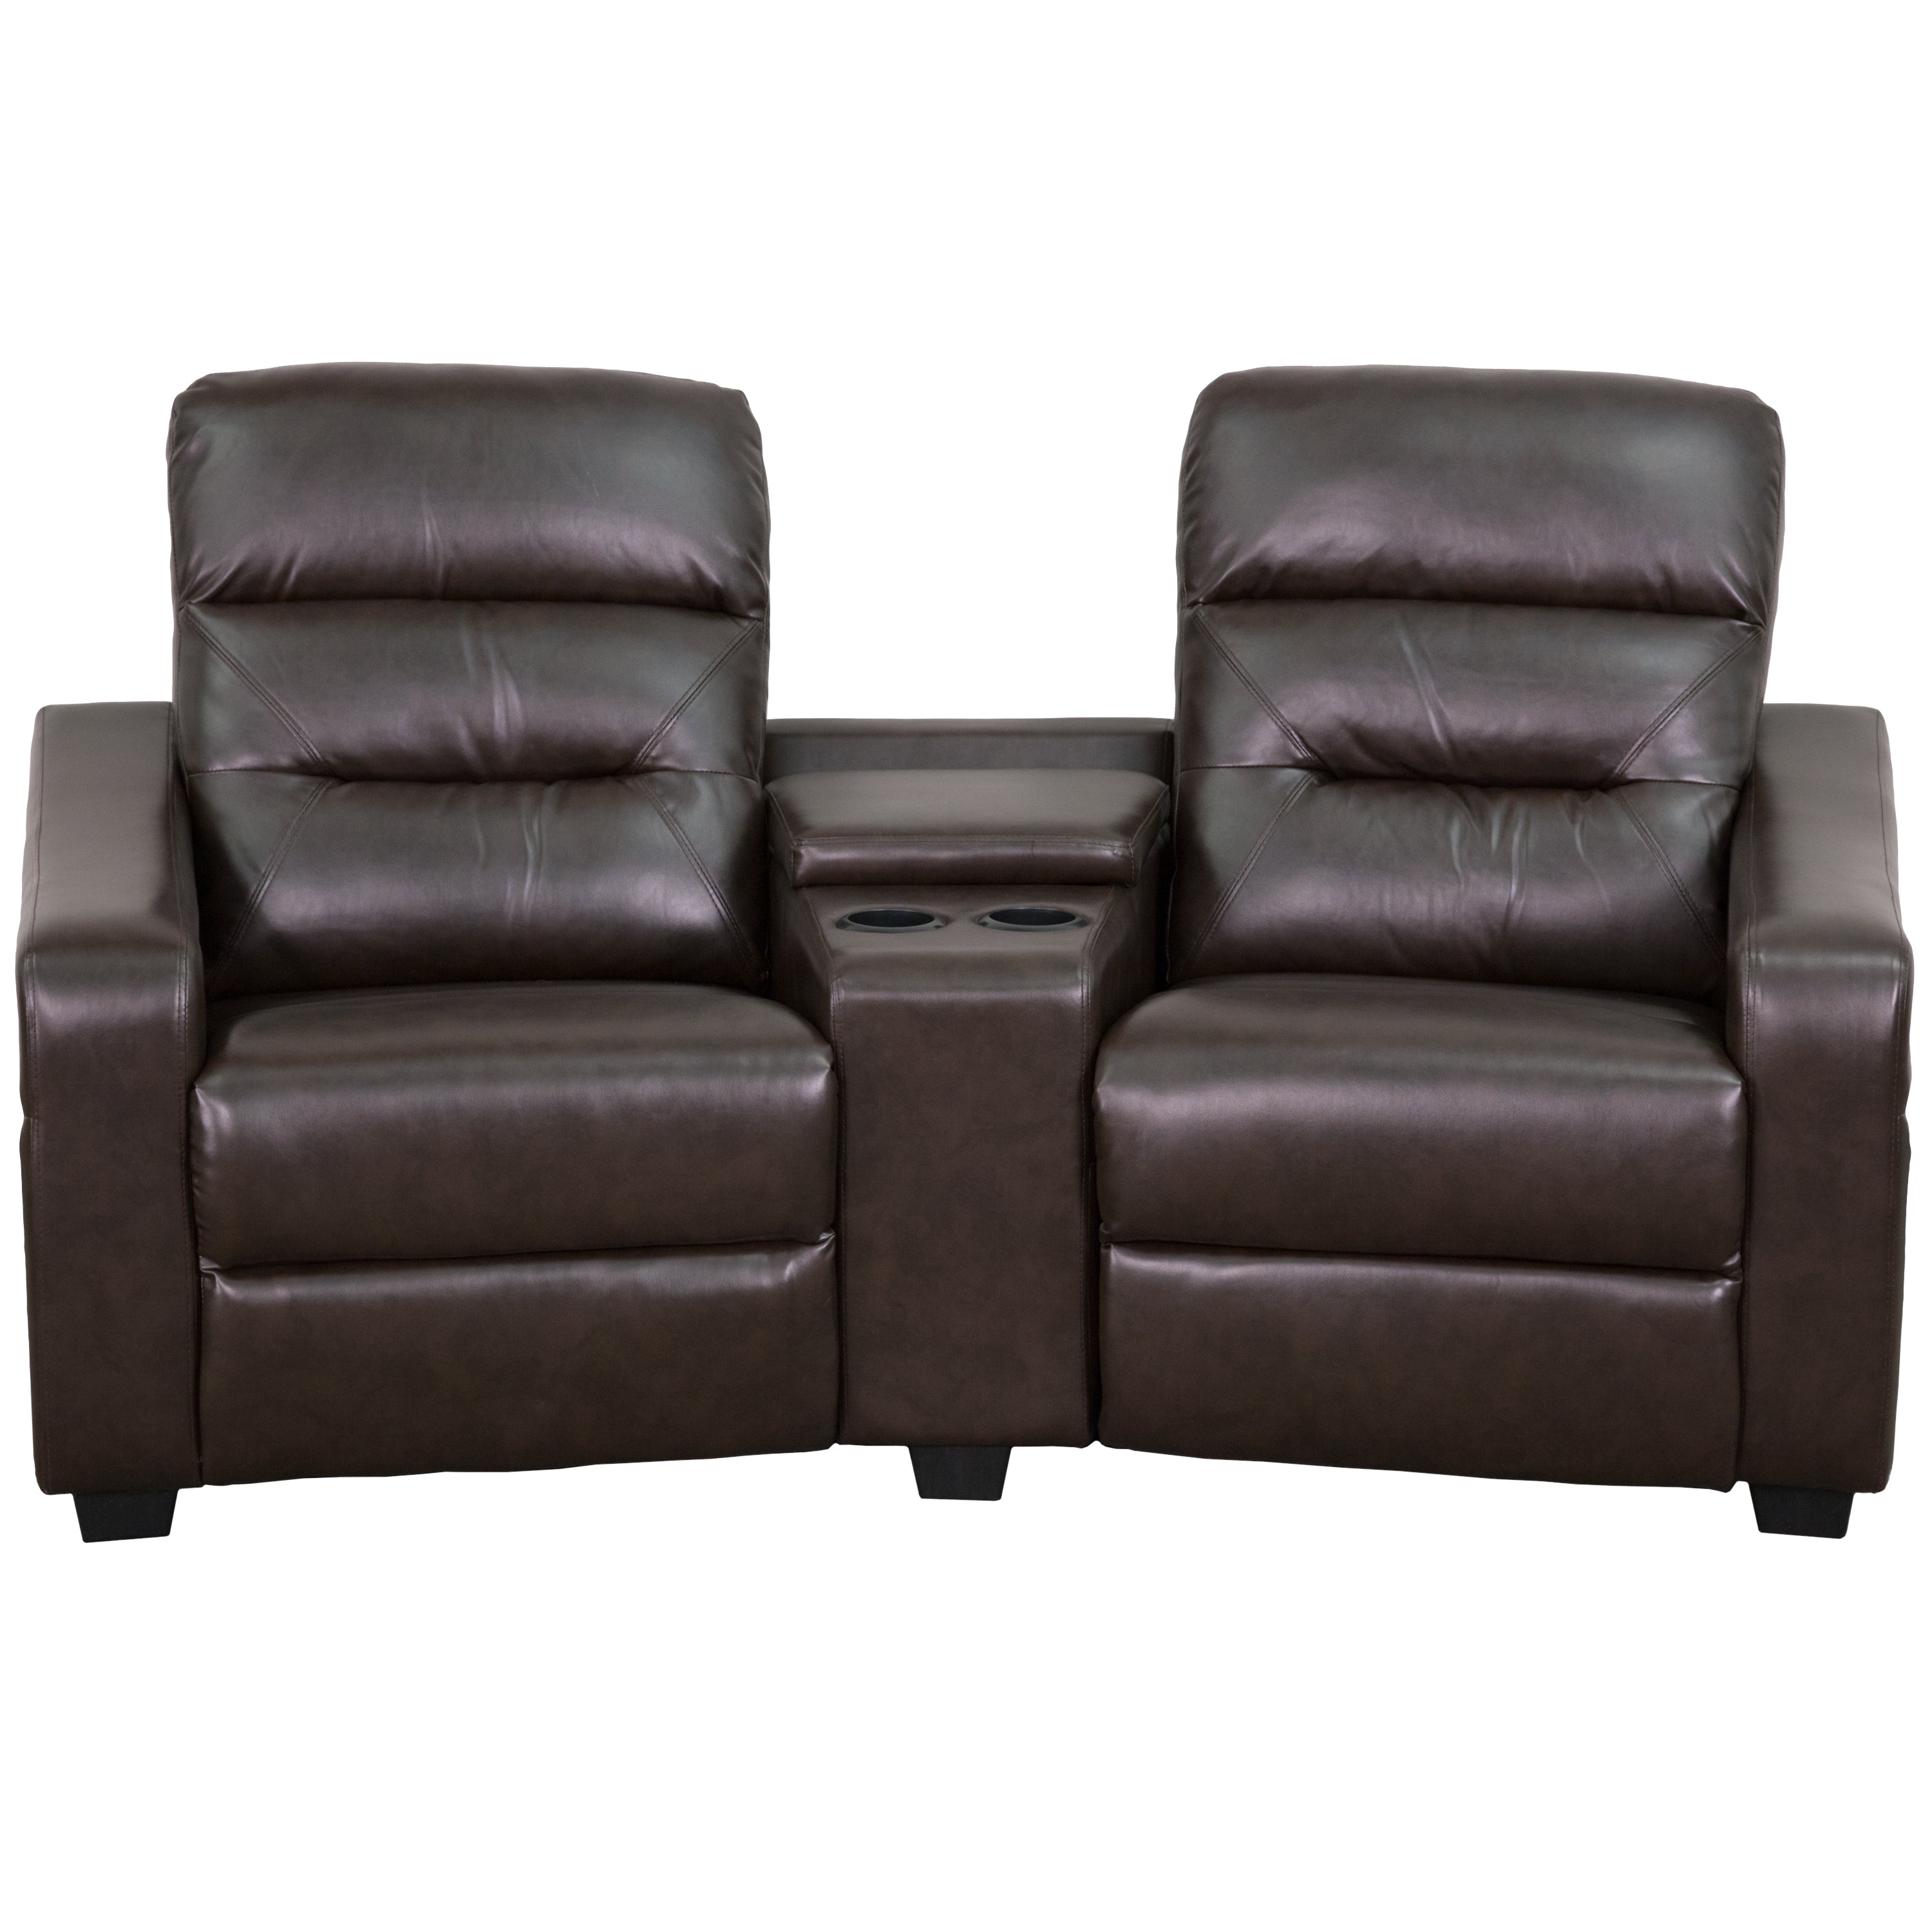 Futura Series 2-Seat Reclining Black LeatherSoft Tufted Bustle Back Theater Seating Unit with Cup Holders-Theater Seating-Flash Furniture-Wall2Wall Furnishings